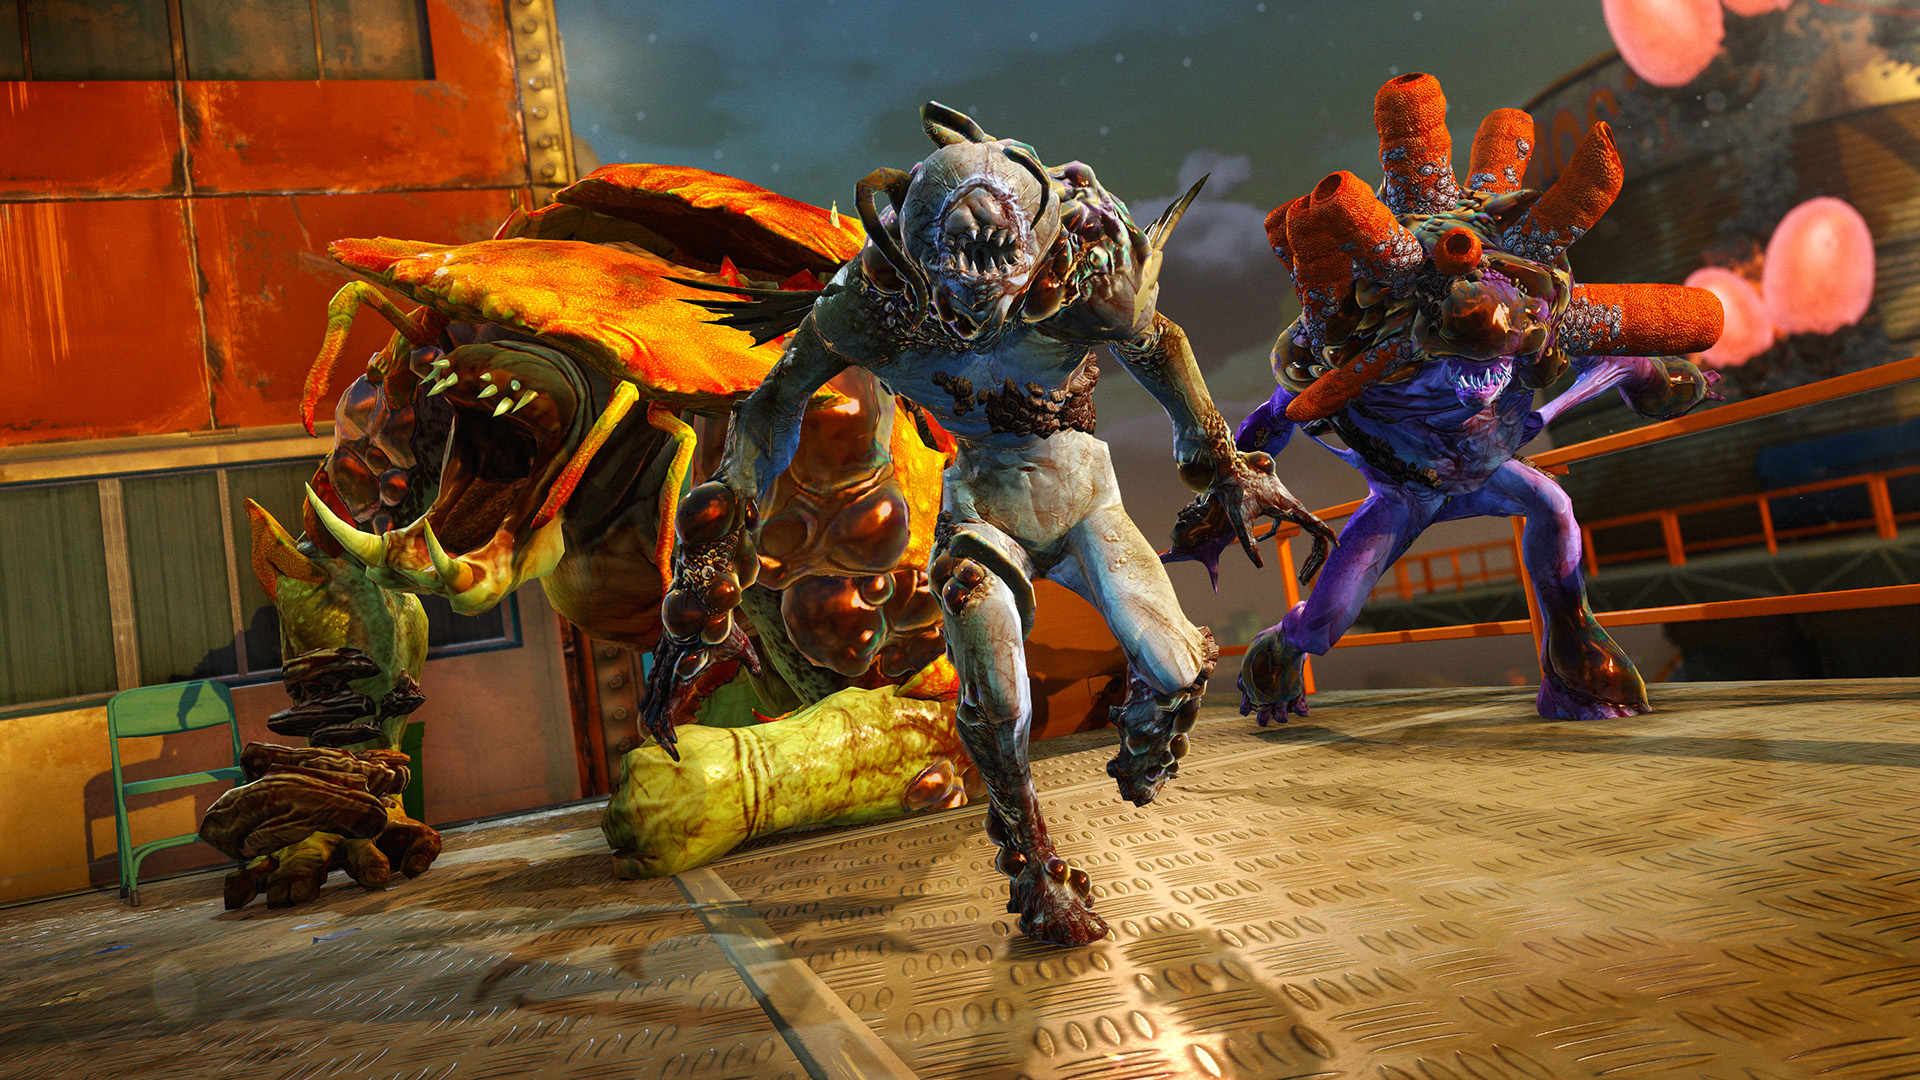 So, last year's best game was actually Sunset Overdrive